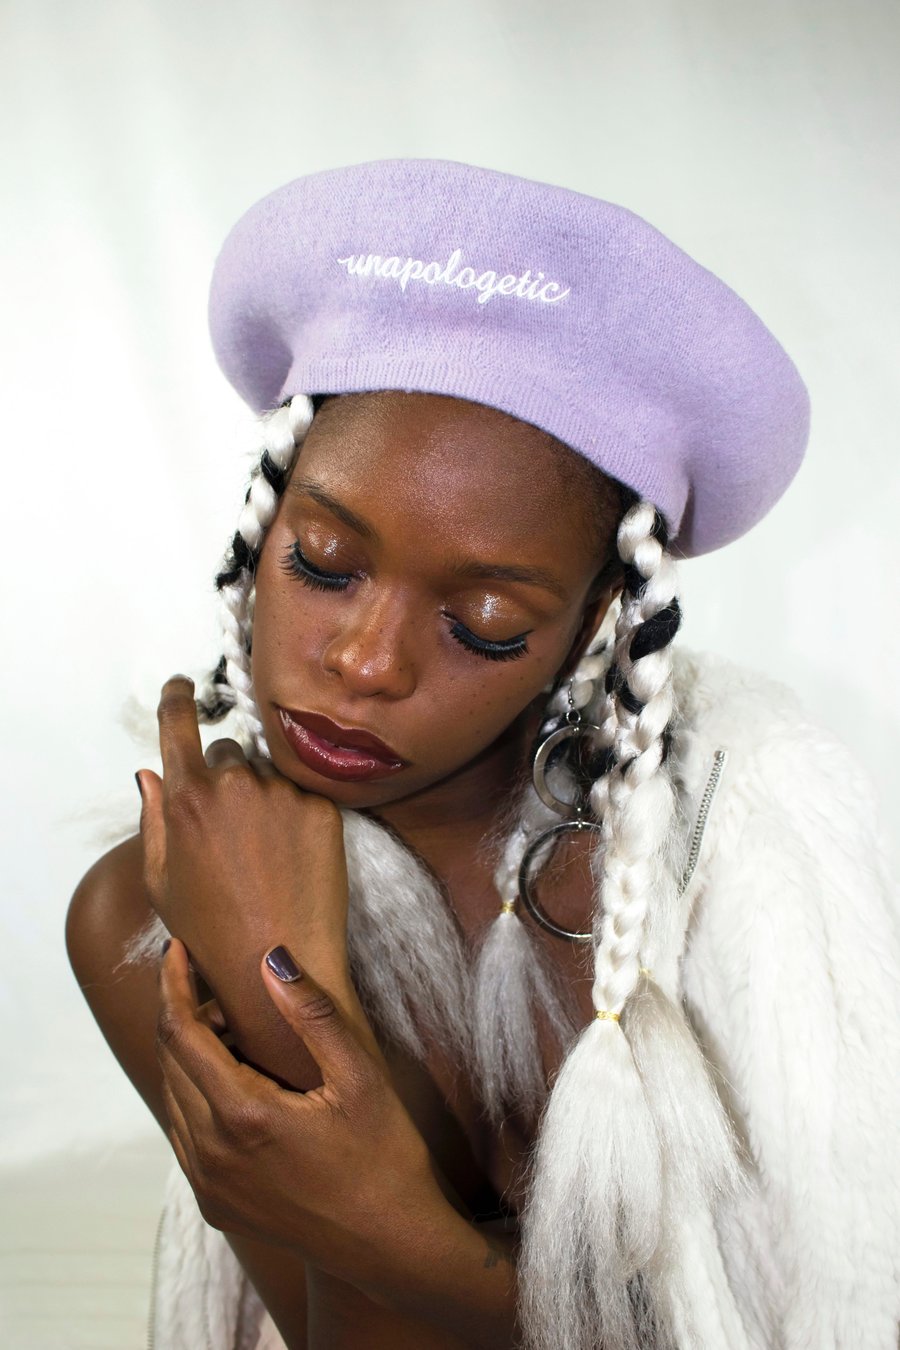 Image of "Unapologetic" berets